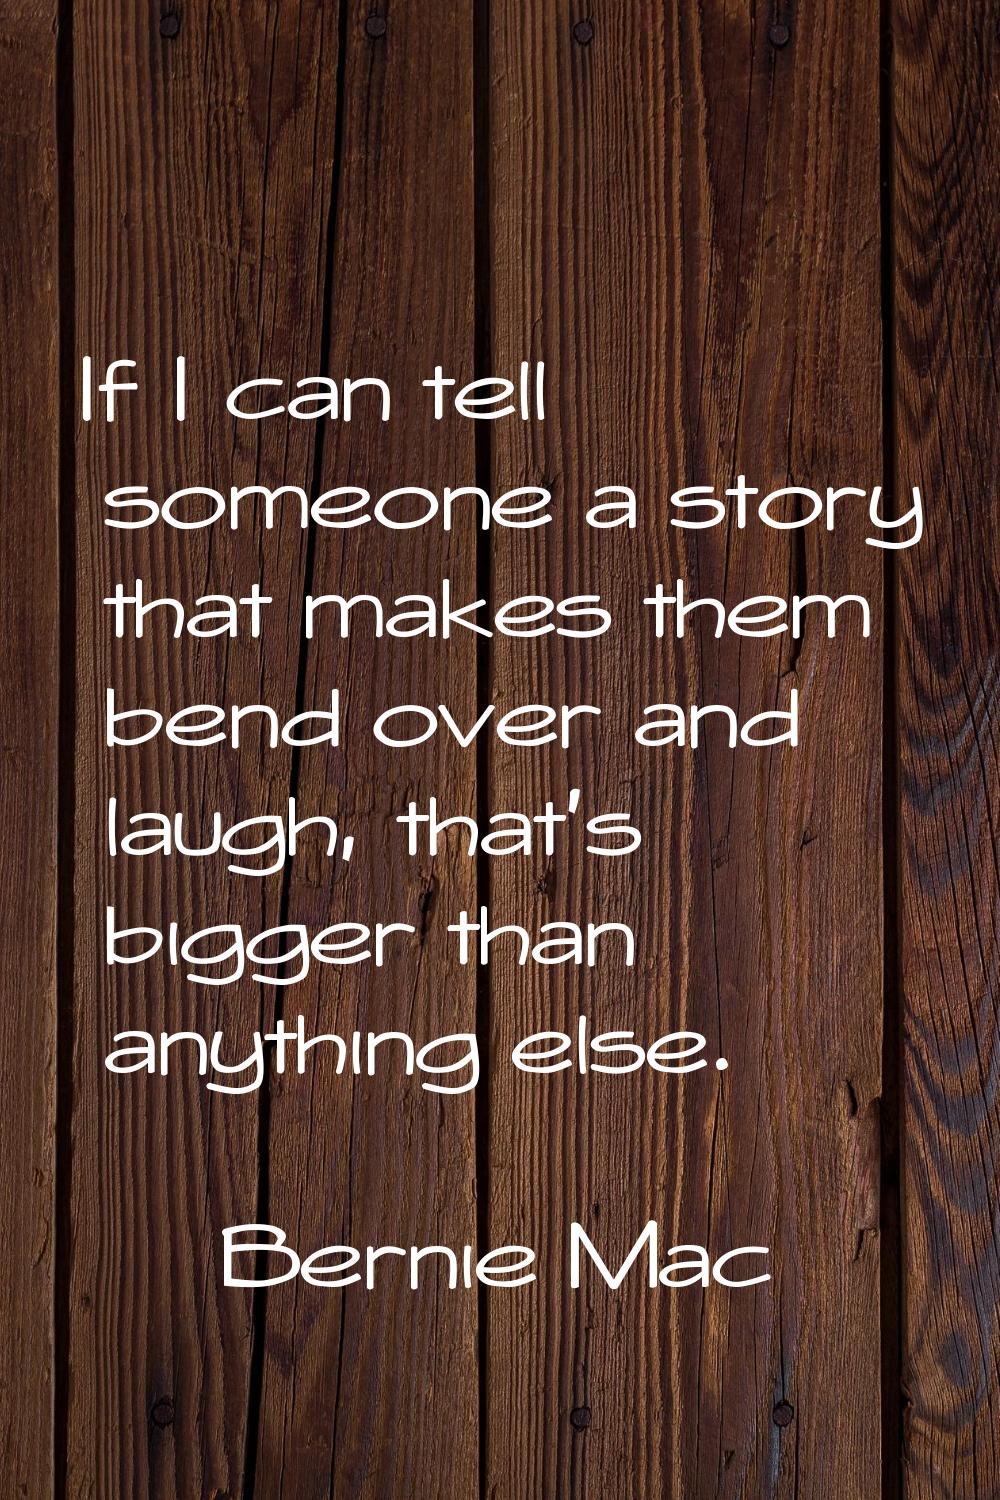 If I can tell someone a story that makes them bend over and laugh, that's bigger than anything else